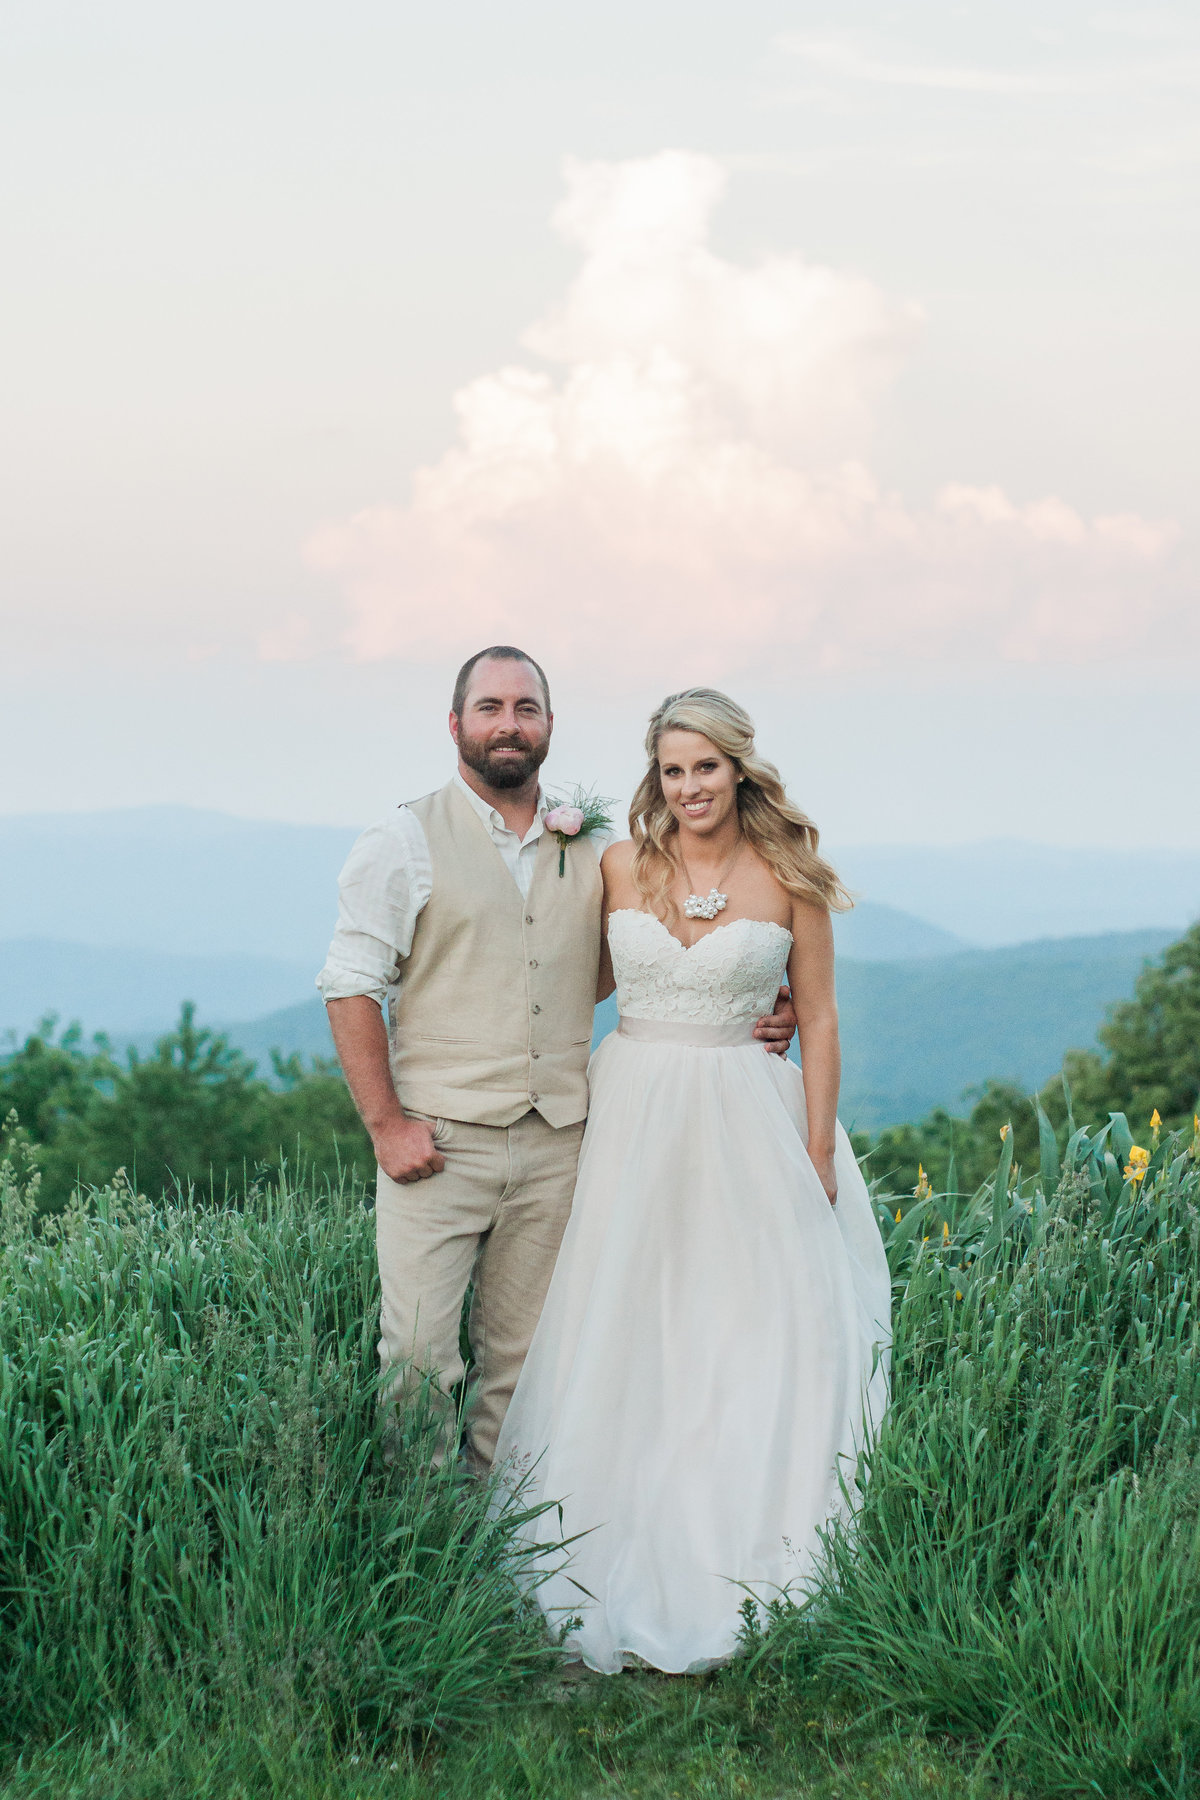 Outdoor wedding ceremony photographed at Overlook Barn by Boone Photographer Wayfaring Wanderer. Overlook Barn is a gorgeous venue on Beech Mountain.